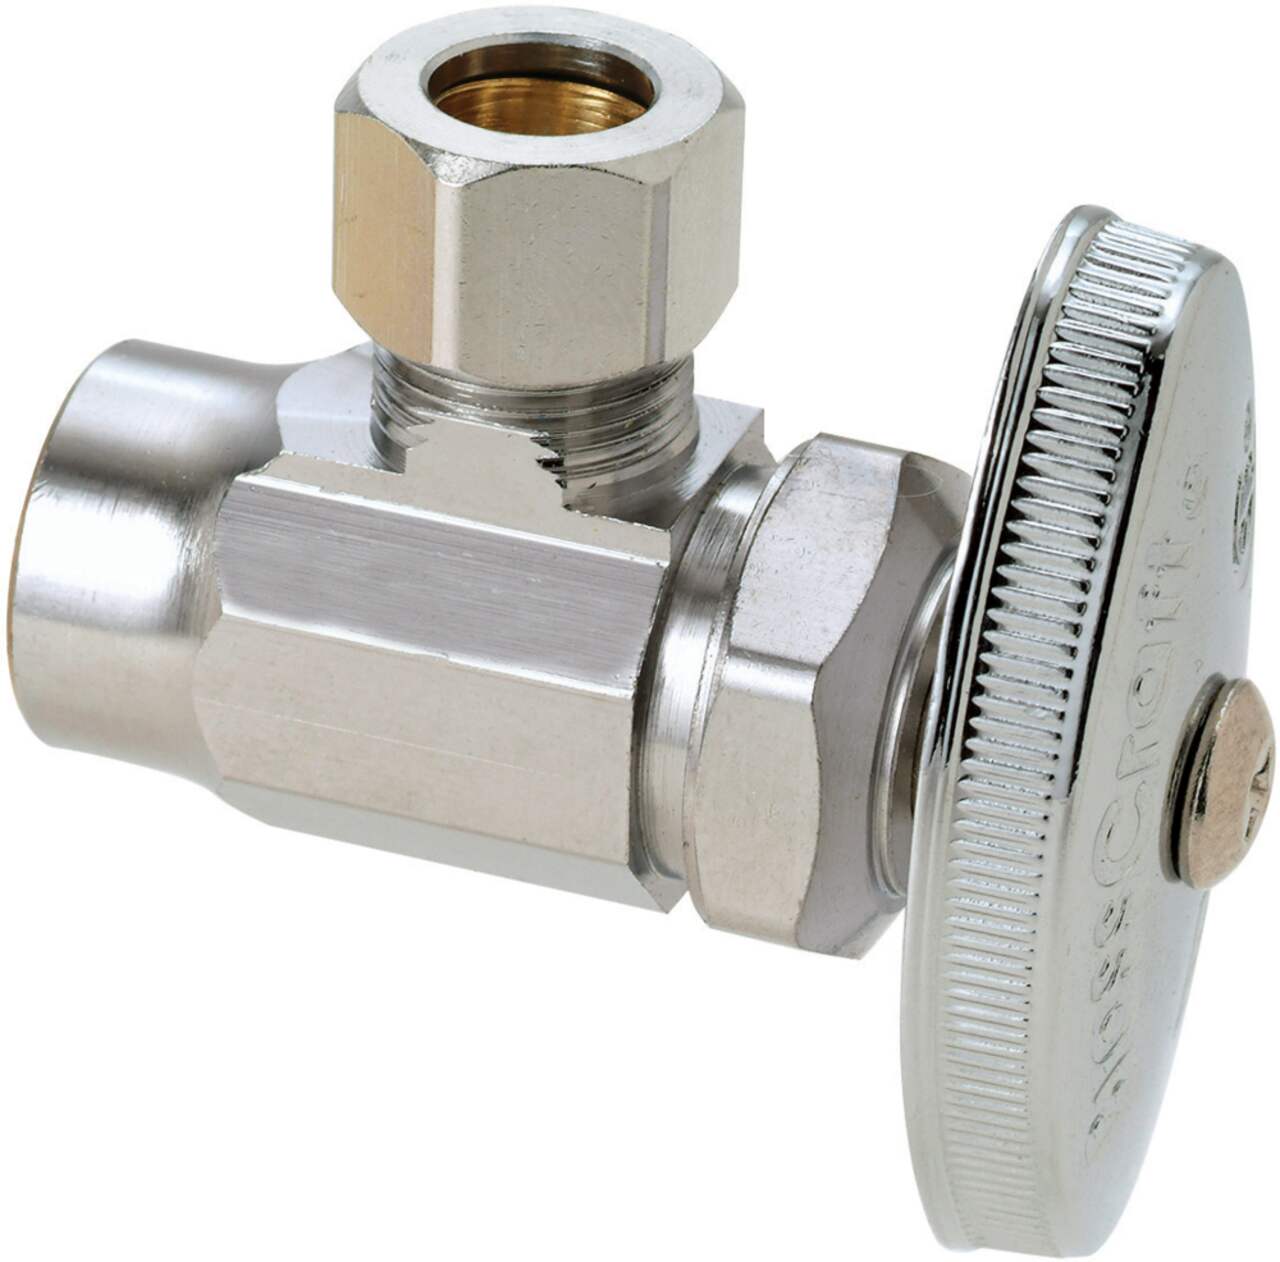 https://media-www.canadiantire.ca/product/fixing/plumbing/rough-plumbing/0630586/plumbshop-angle-valve-1-2-sweat-x-3-8-compression-b160a9e3-a41b-4170-9329-5b507eca1e07.png?imdensity=1&imwidth=640&impolicy=mZoom